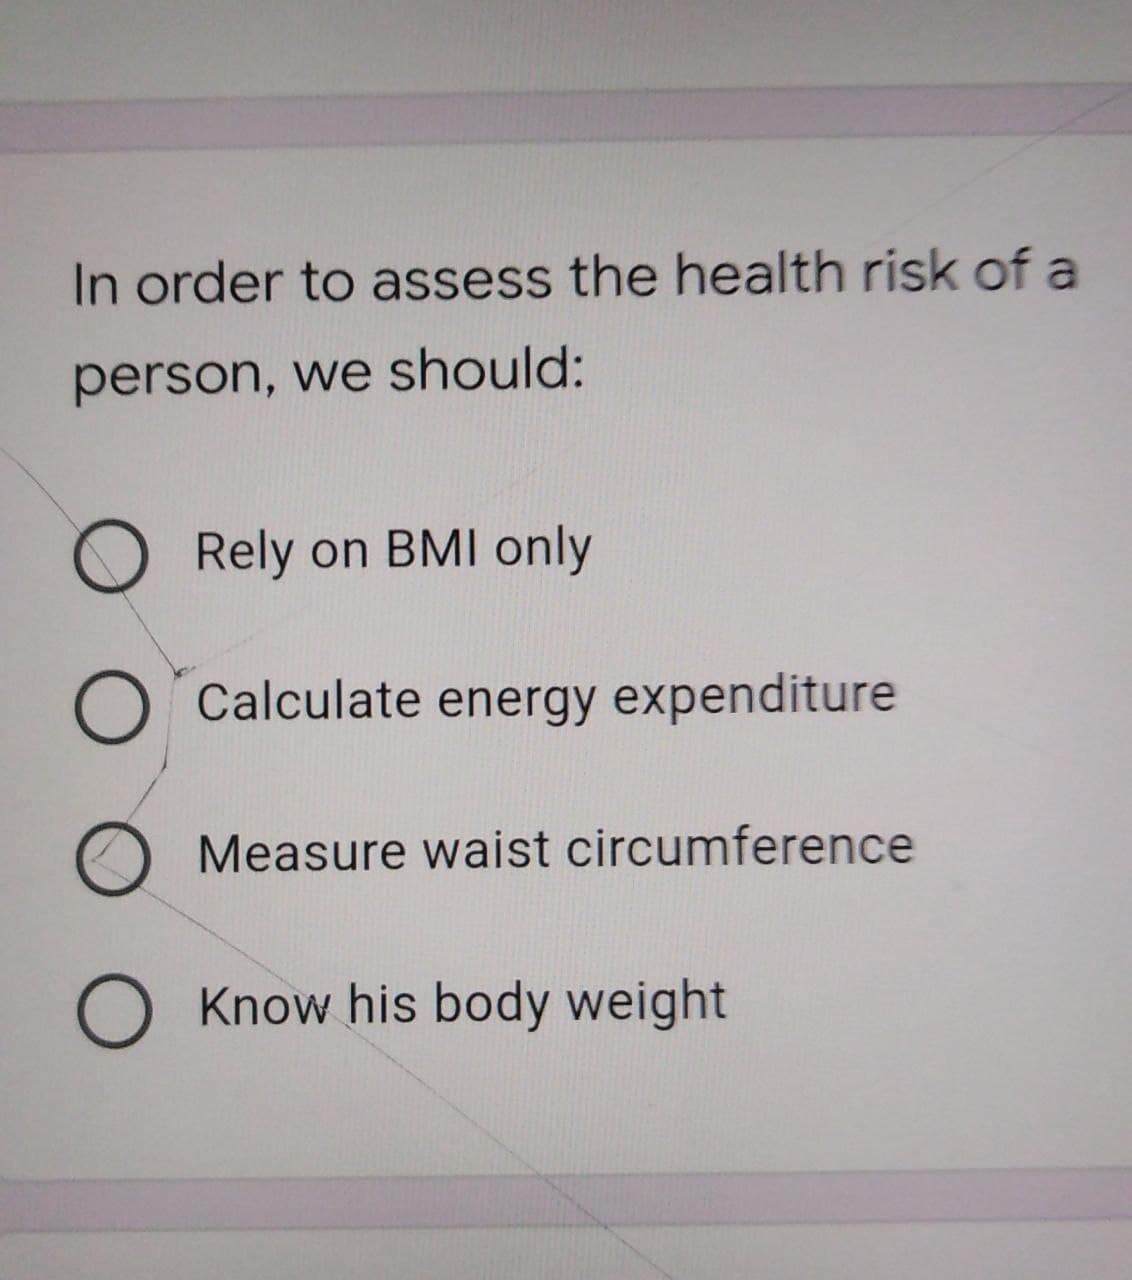 In order to assess the health risk of a
person, we should:
O Rely on BMI only
O Calculate energy expenditure
O Measure waist circumference
O Know his body weight
